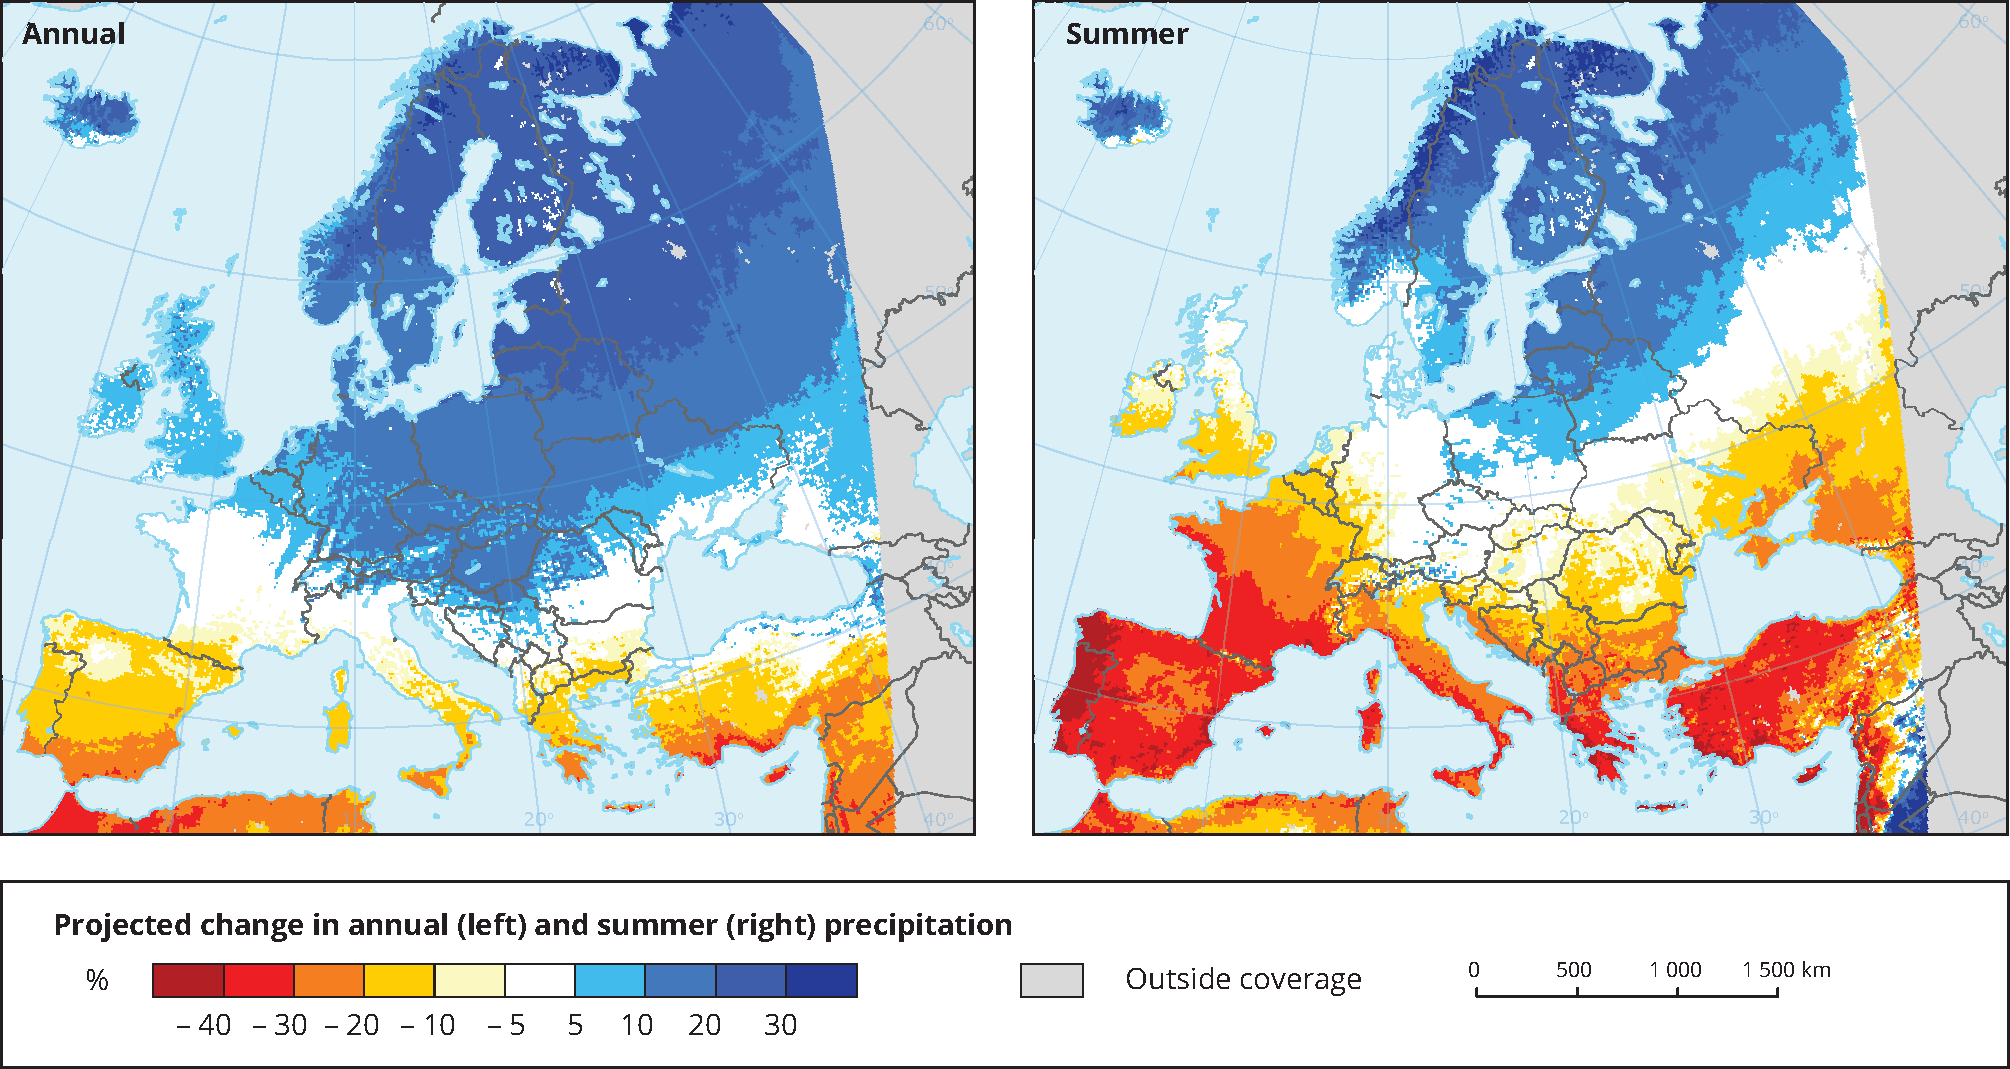 Projected change in annual and summer precipitation